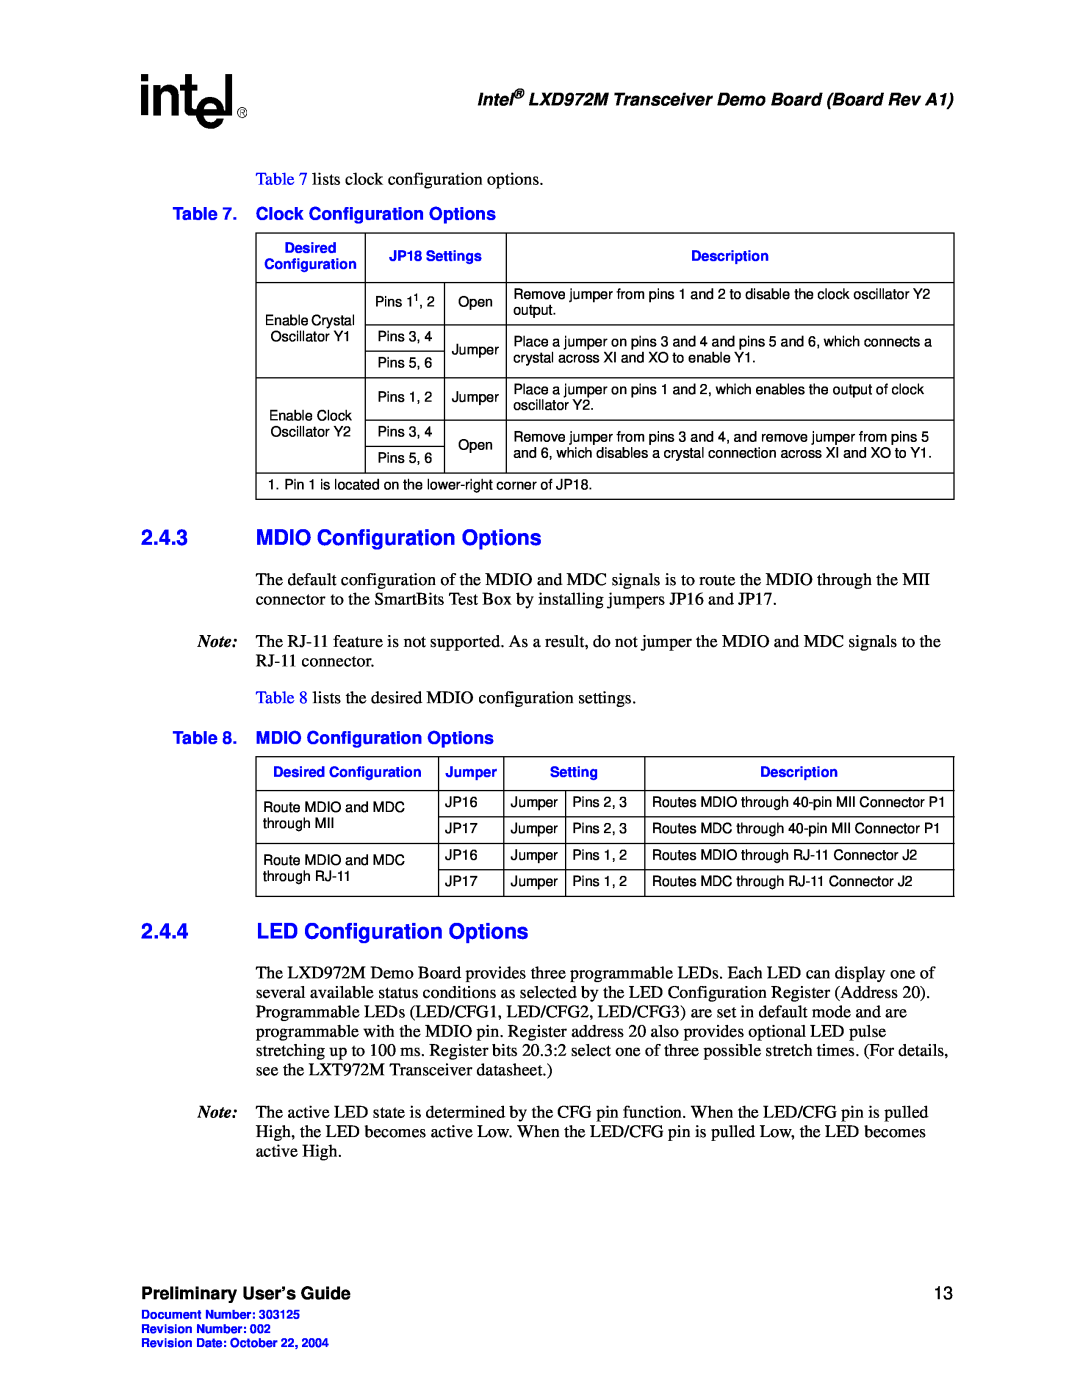 Intel LXD972M manual 2.4.3MDIO Configuration Options, 2.4.4LED Configuration Options, Preliminary User’s Guide 